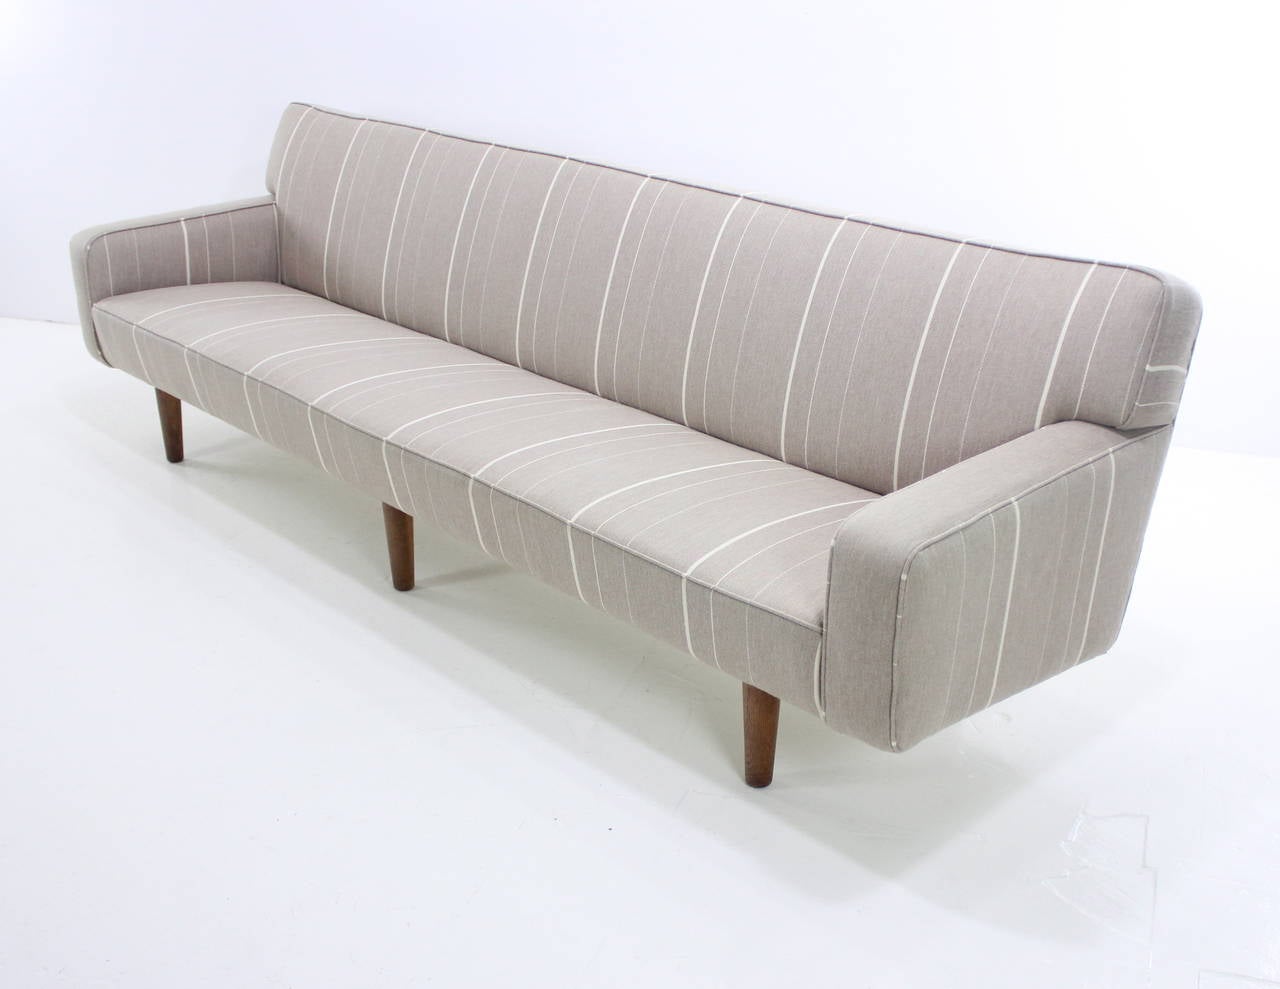 Extraordinary Danish Modern Sofa Custom Designed by Hans Wegner In Excellent Condition For Sale In Portland, OR